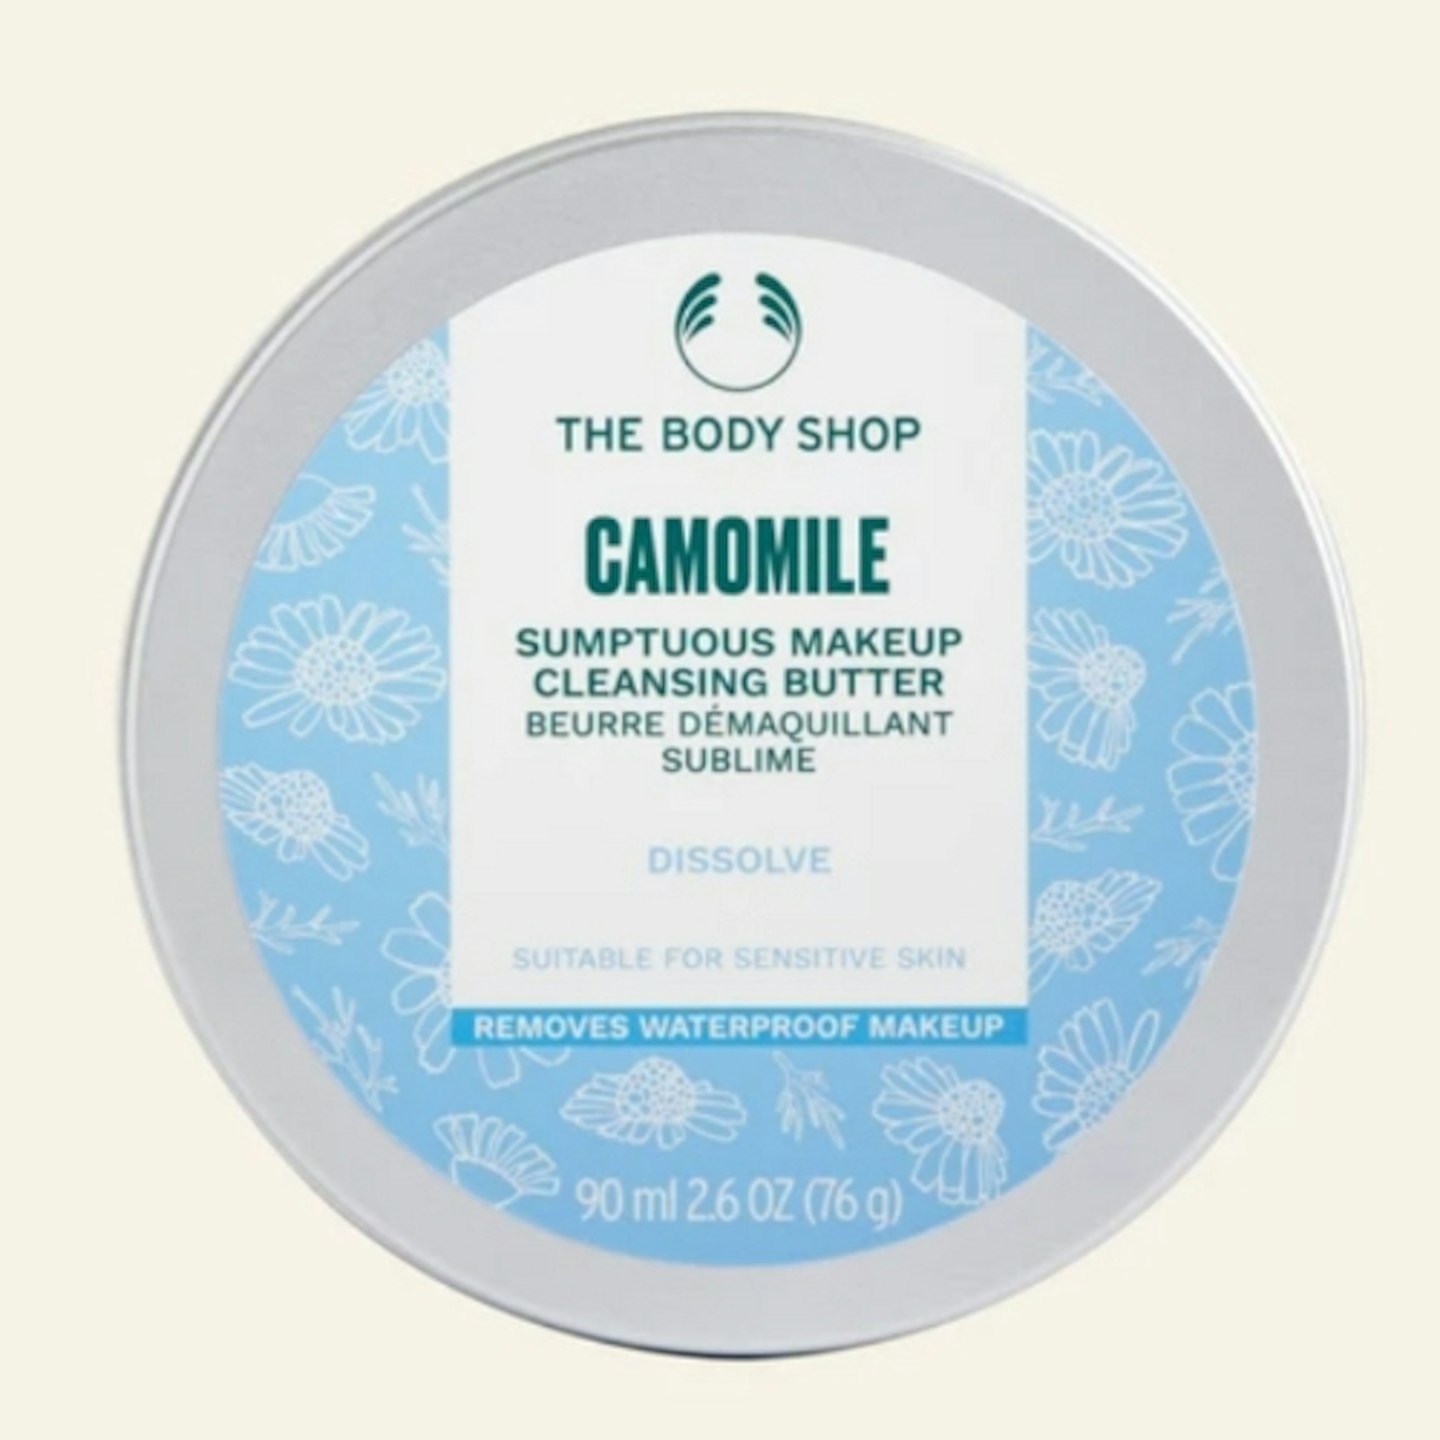 Camomile Sumptuous Makeup Cleansing Butter 90ml